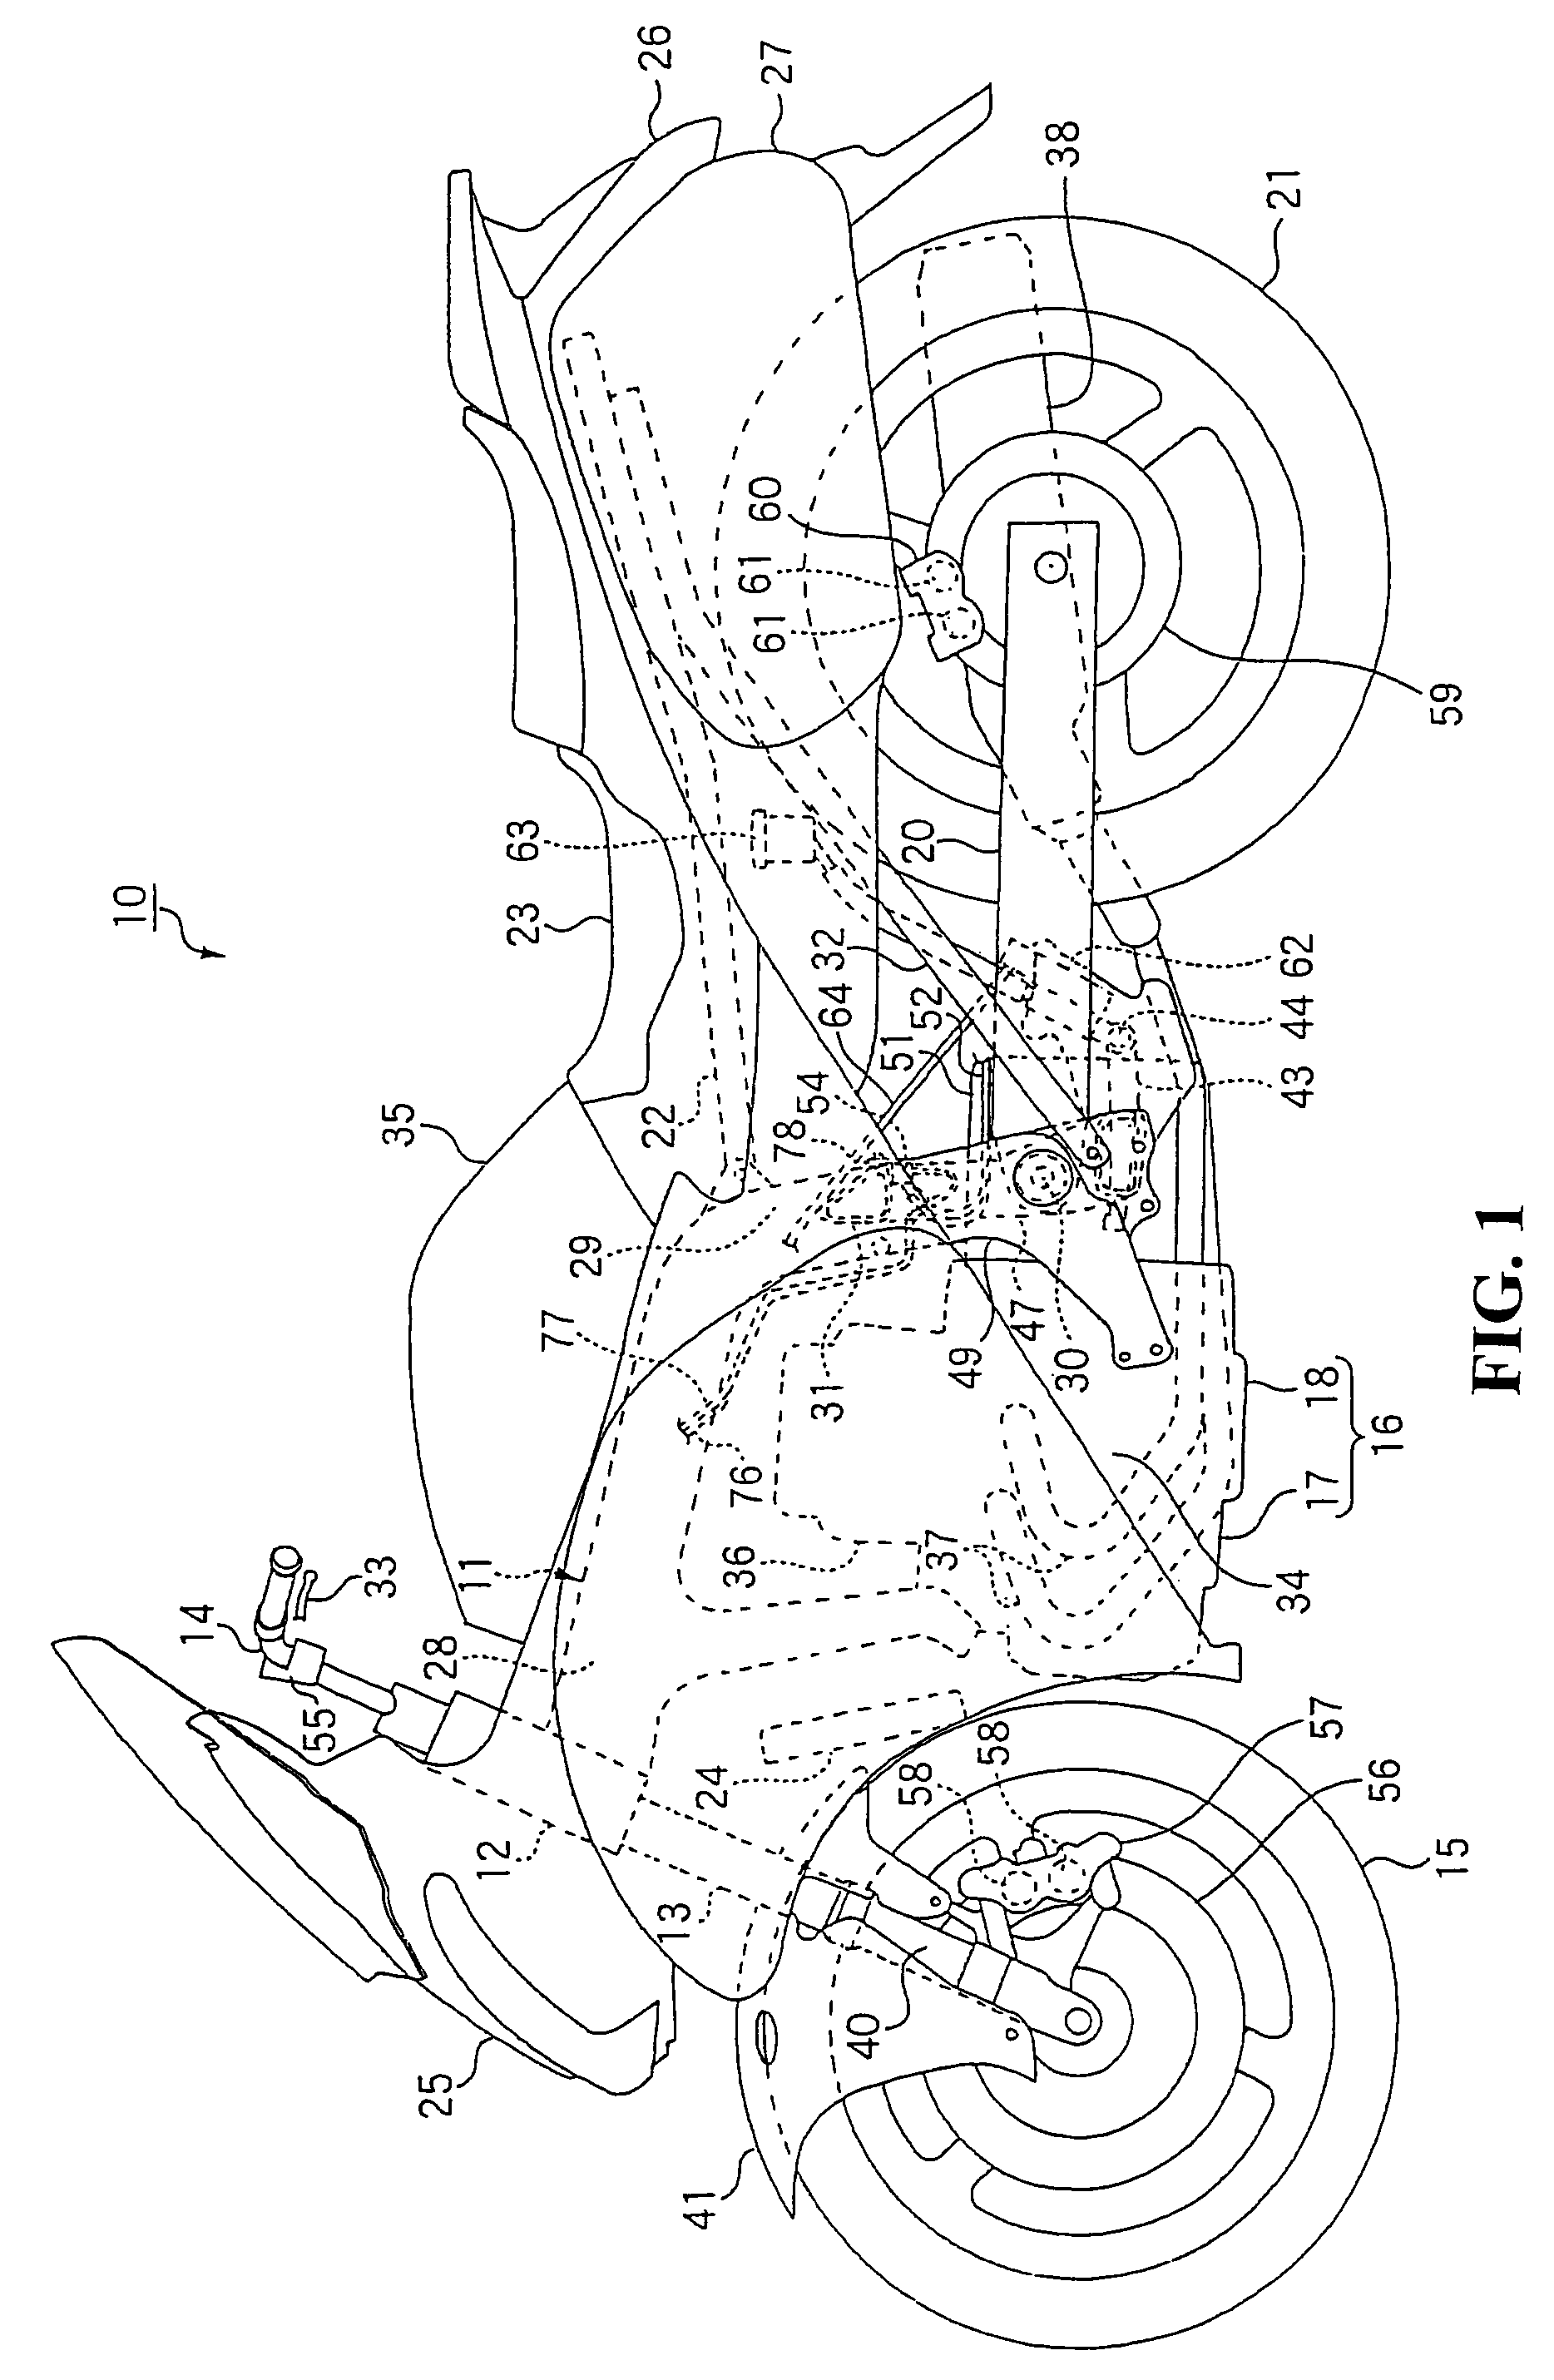 Brake support structure